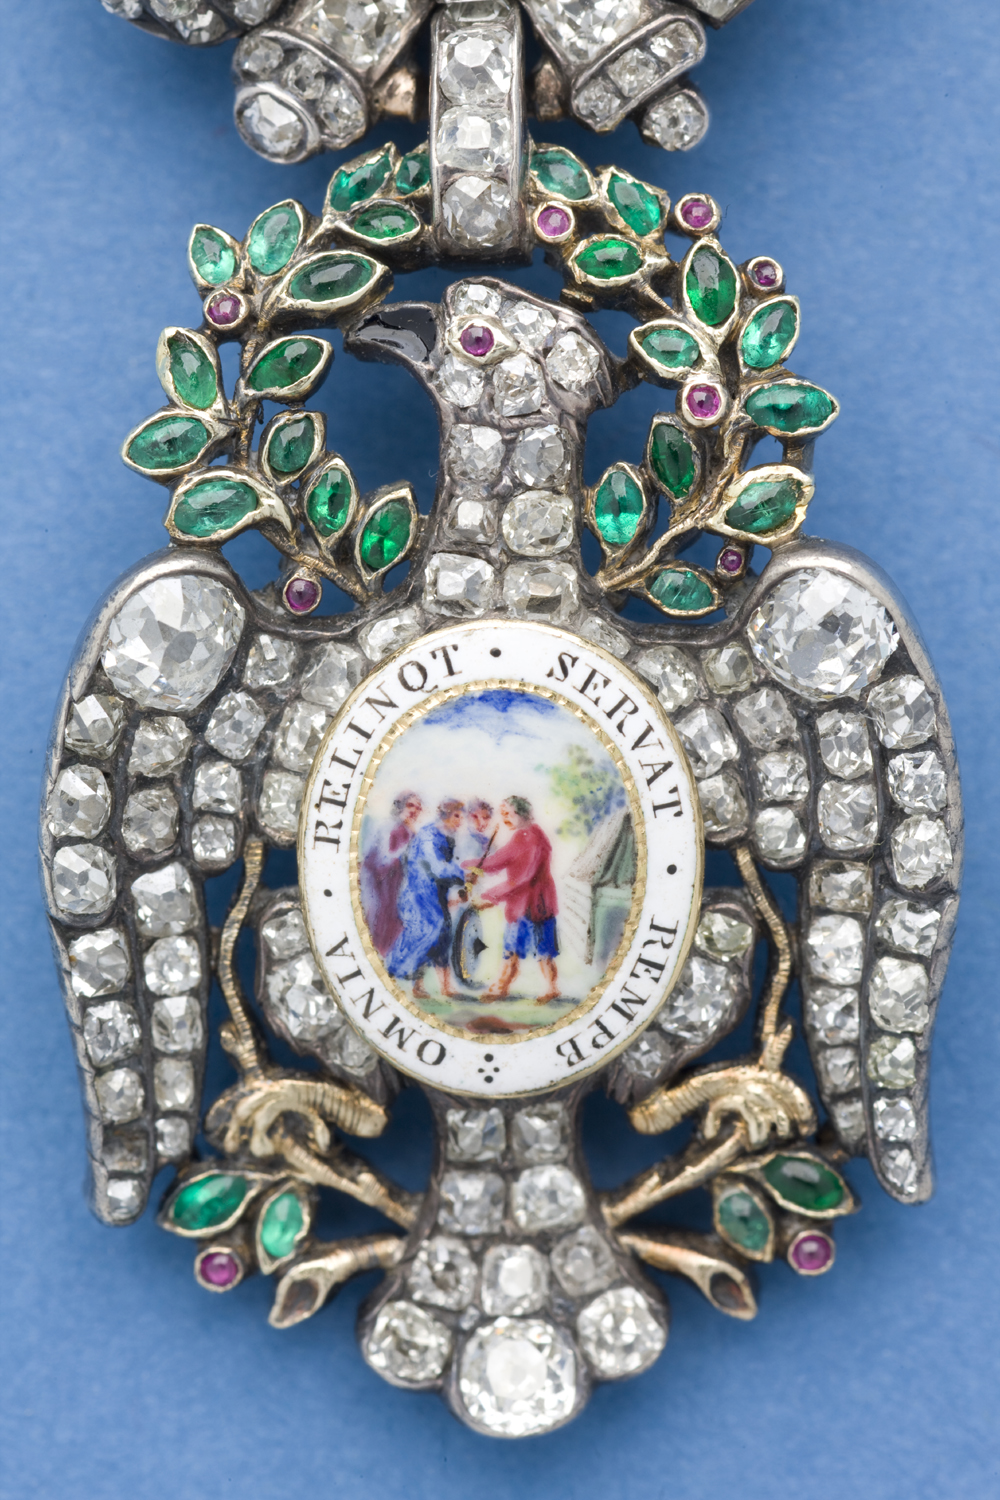 Detail of the front side of the body of the Diamond Eagle insignia of the Society of the Cincinnati adorned with gemstones and enamel